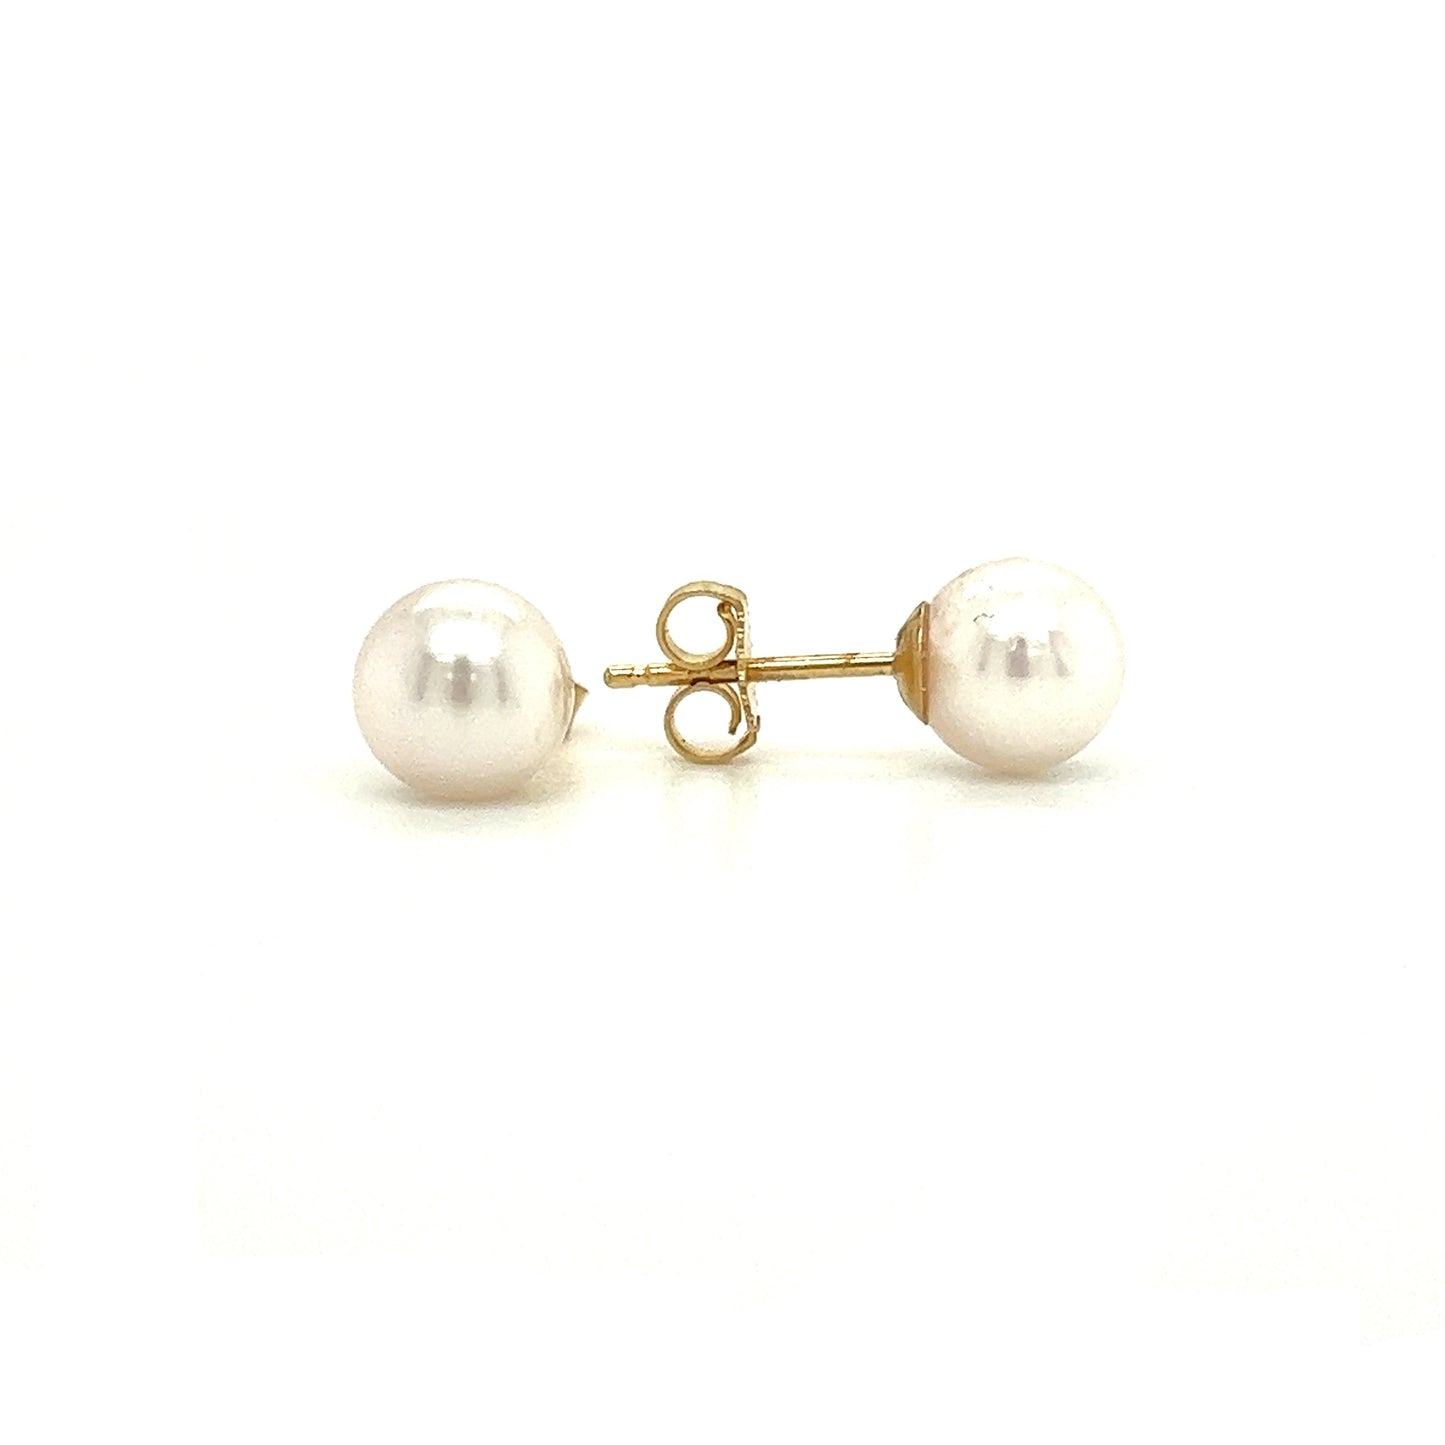 Pearl 6.5mm Stud Earrings in 14K  Yellow Gold Front and Side View